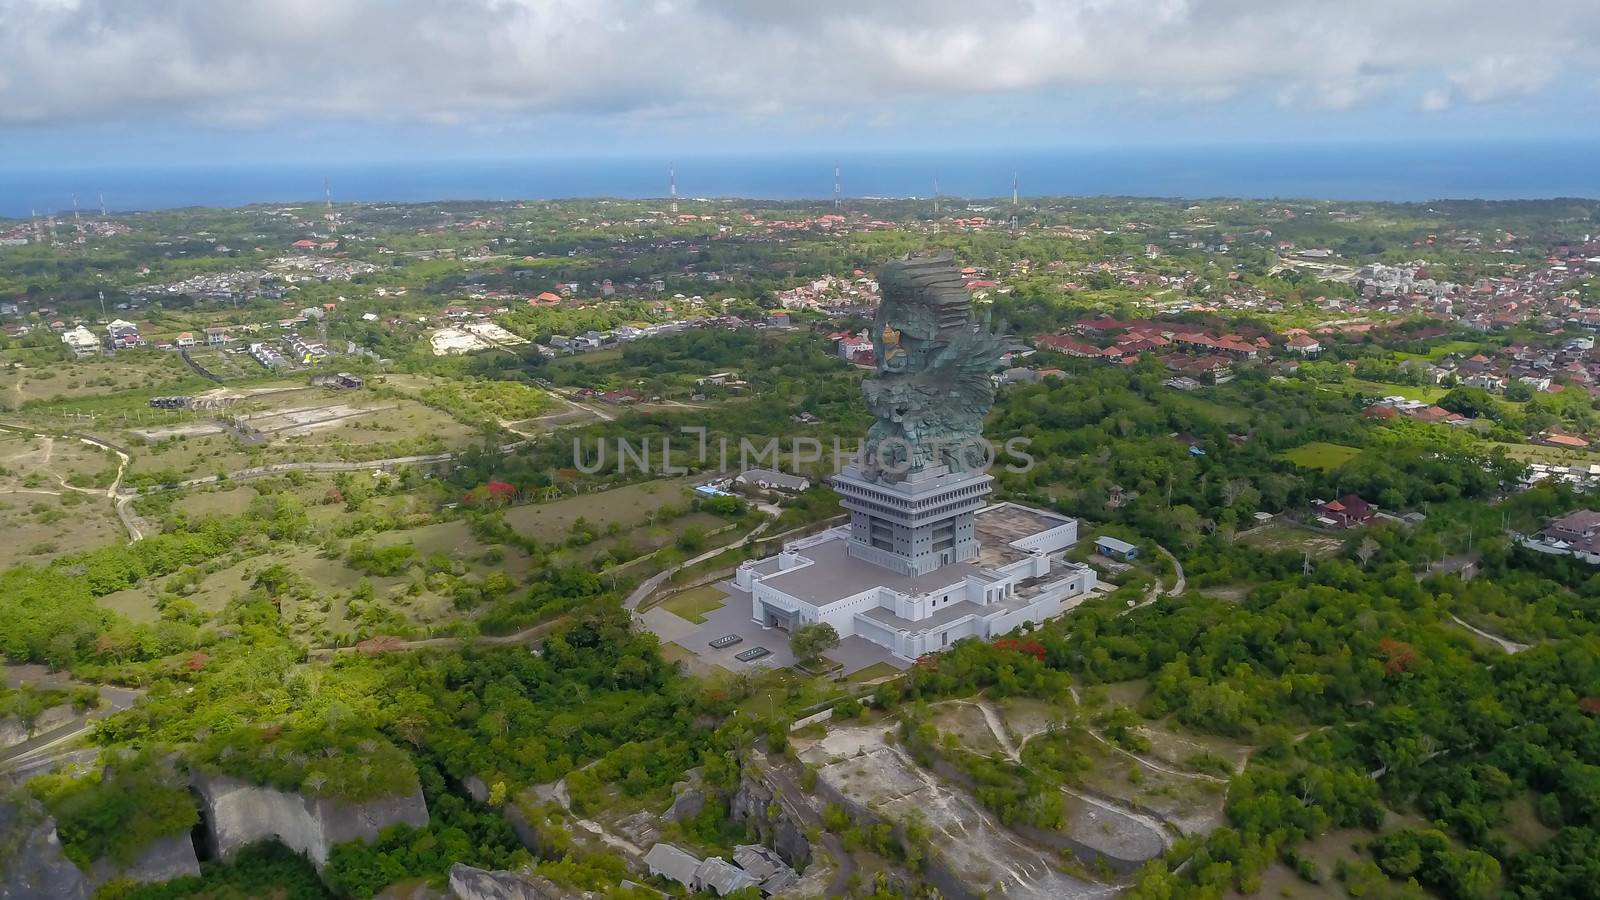 Garuda Wisnu Kencana statue at GWK Cultural Park in South Kuta one of the main attractions and the most recognizable symbols of Bali, Indonesia.